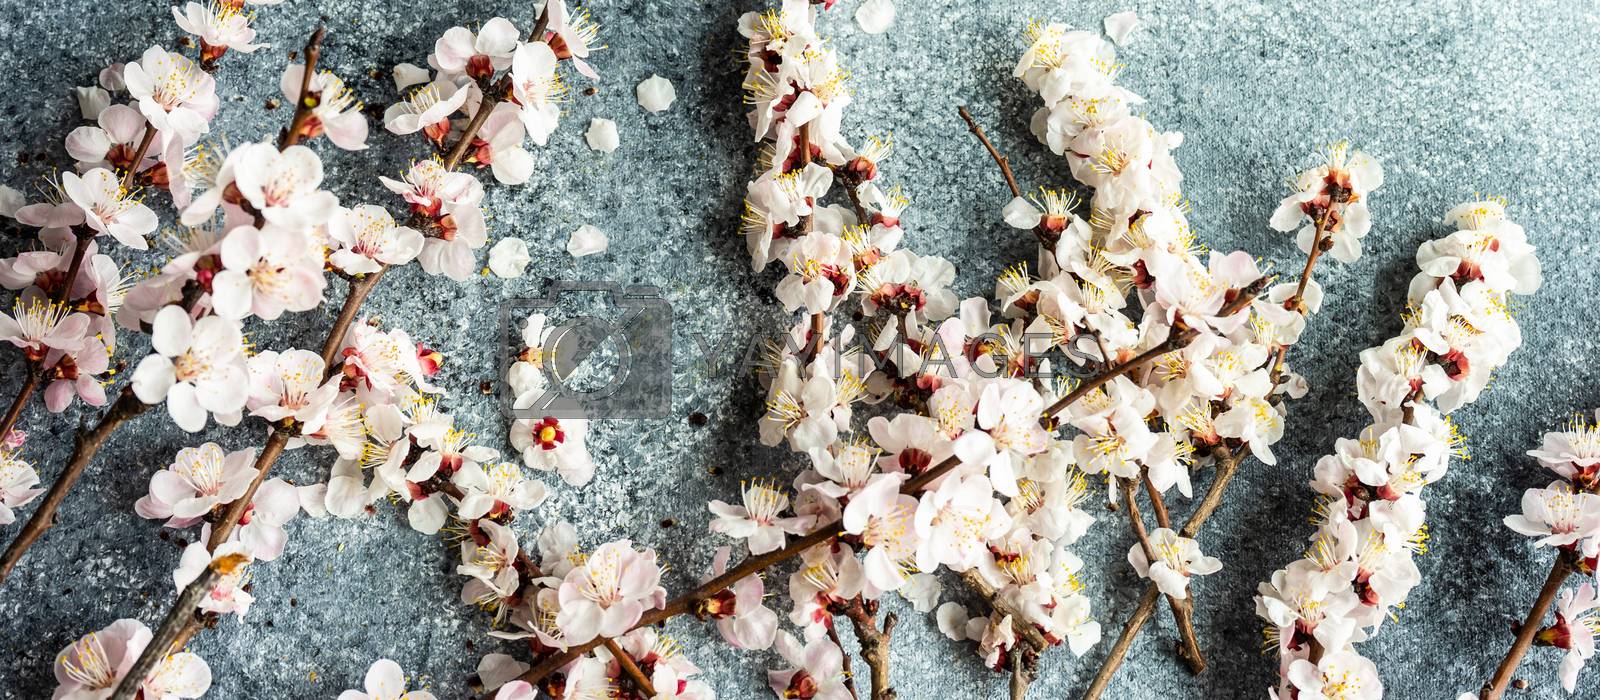 Royalty free image of Spring floral concept with apricot blossom by Elet